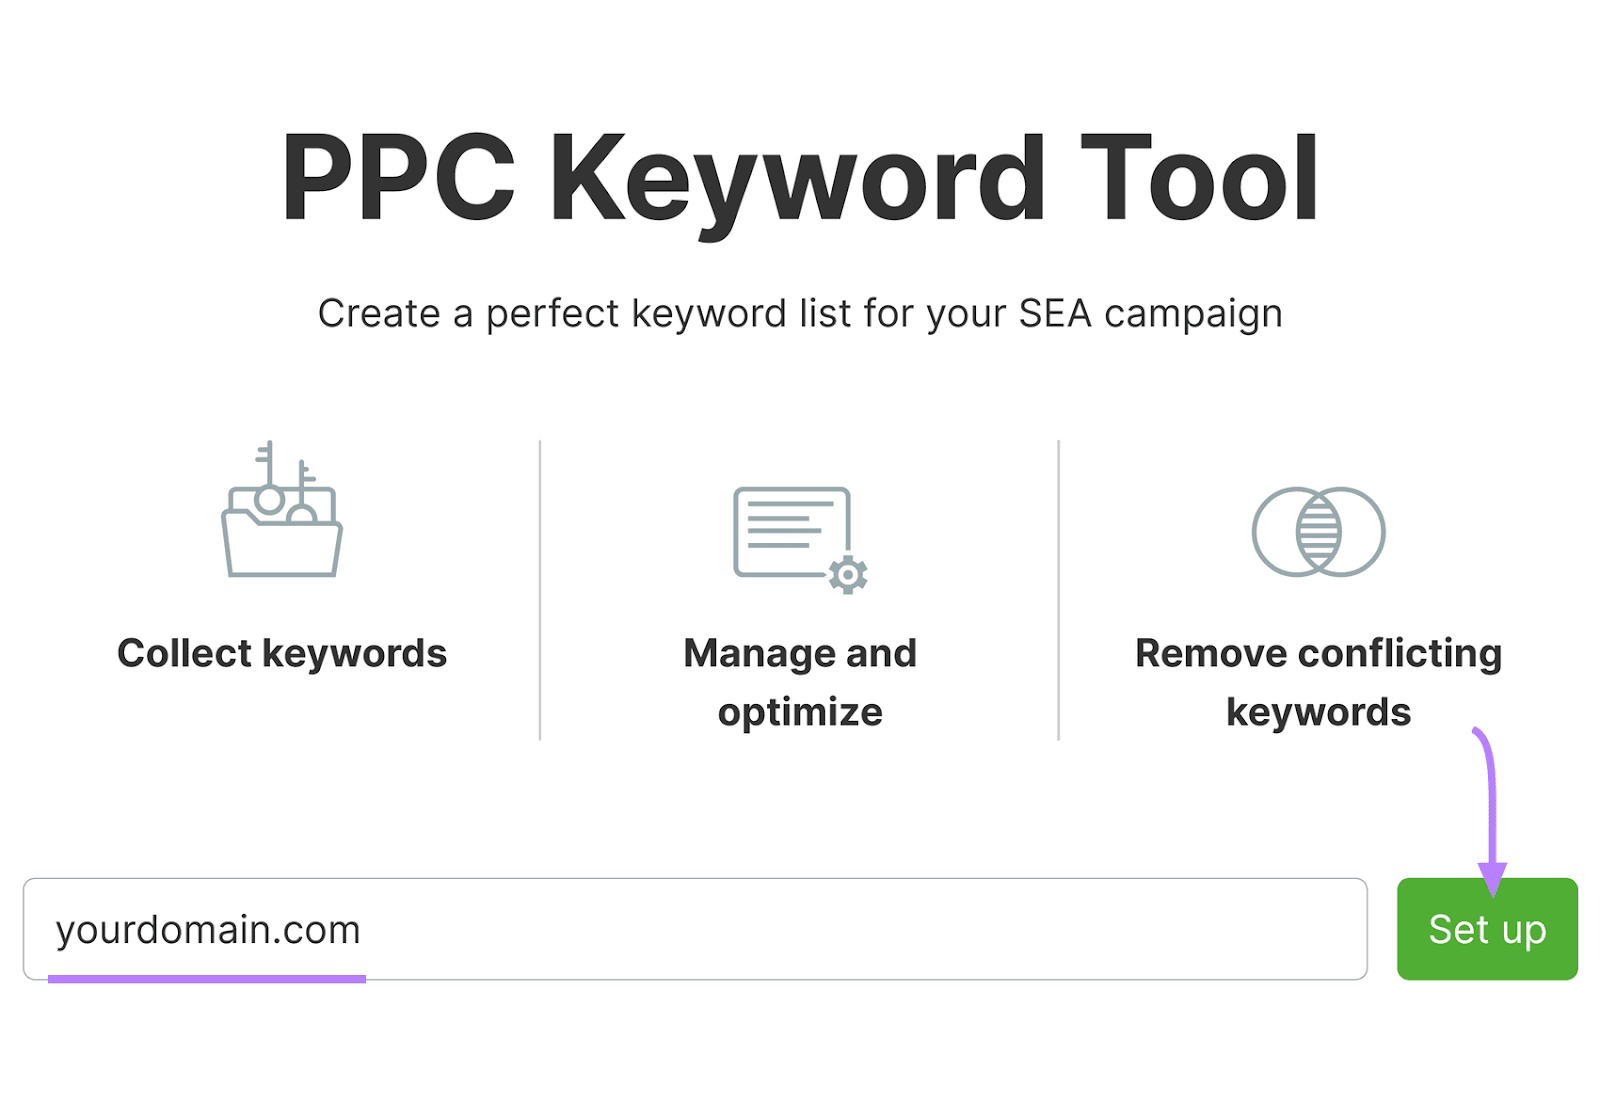 Interface showing a three-step process for a PPC Keyword Tool alongside a domain input field, and a "Set up" button.